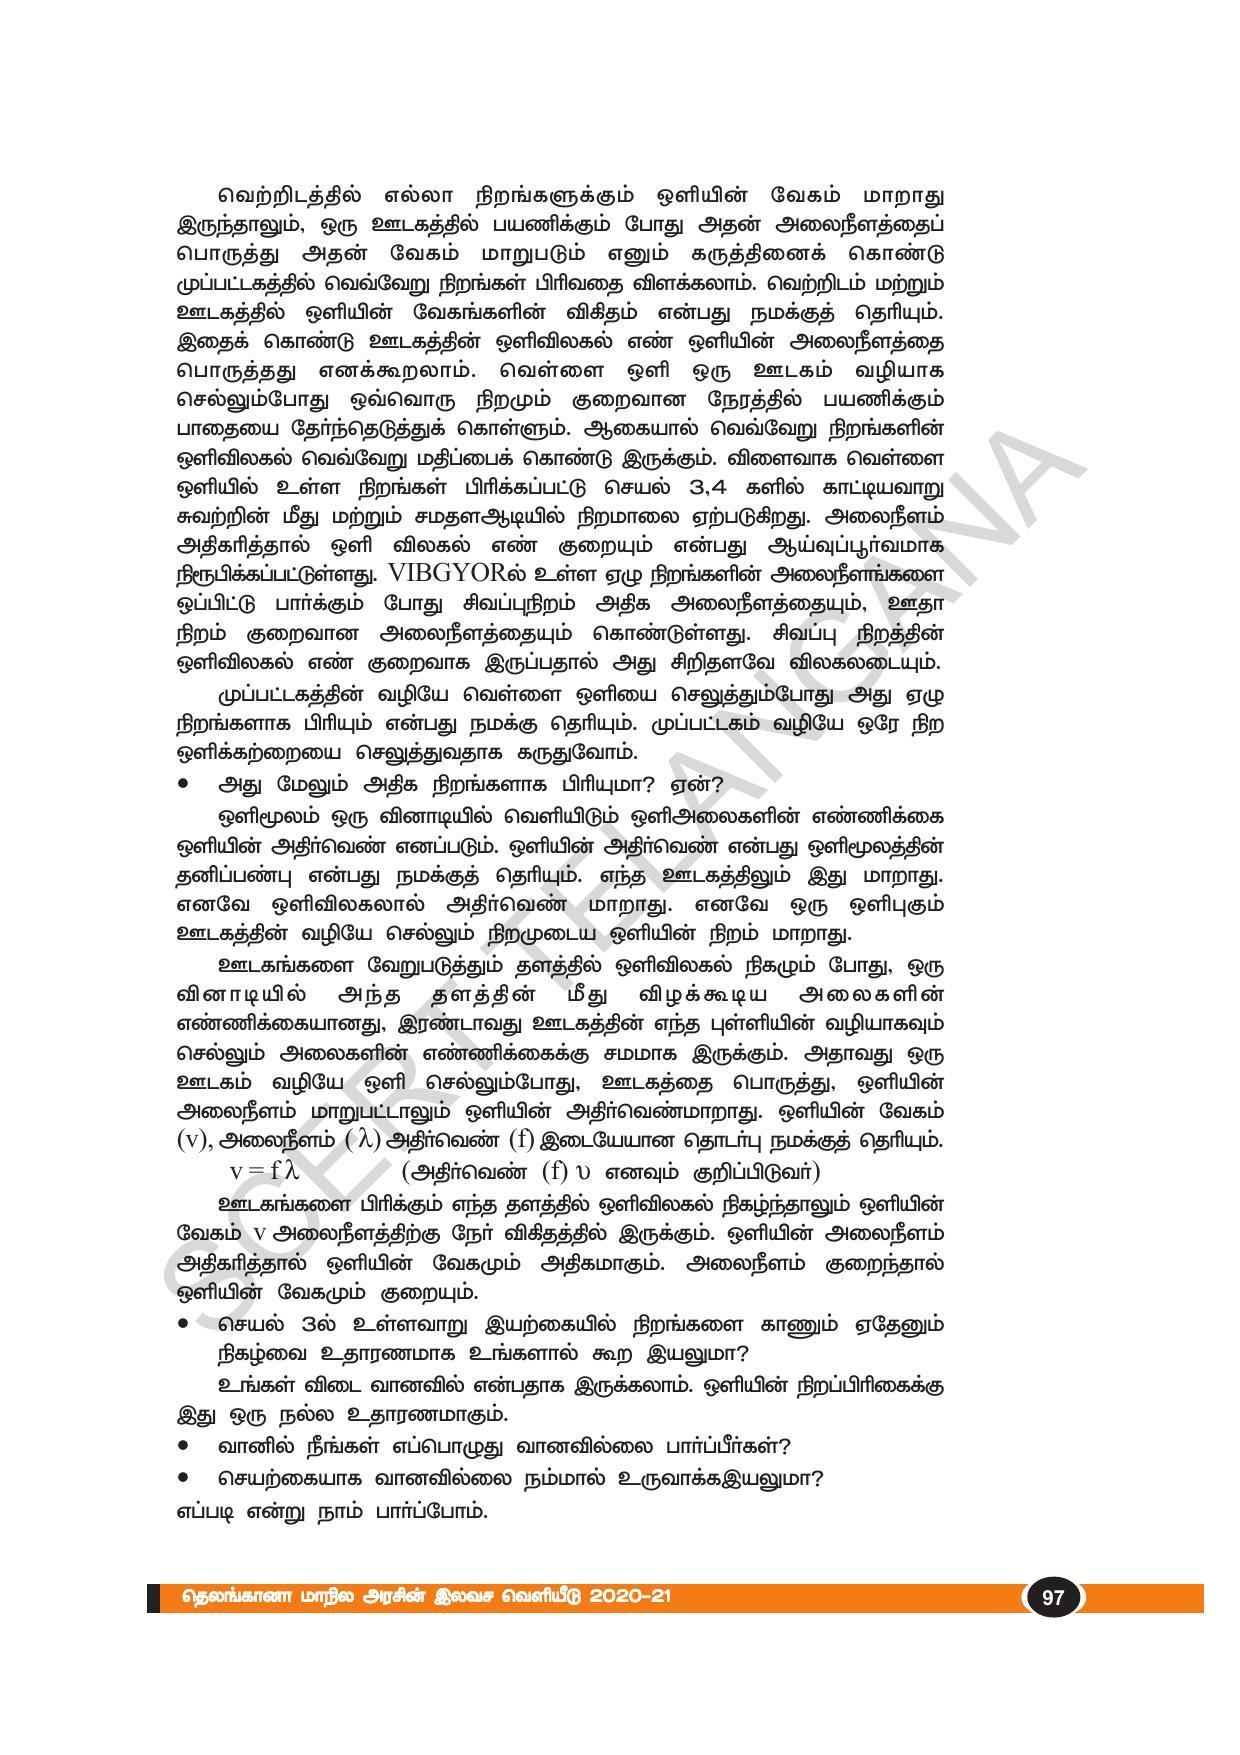 TS SCERT Class 10 Physical Science(Tamil Medium) Text Book - Page 109